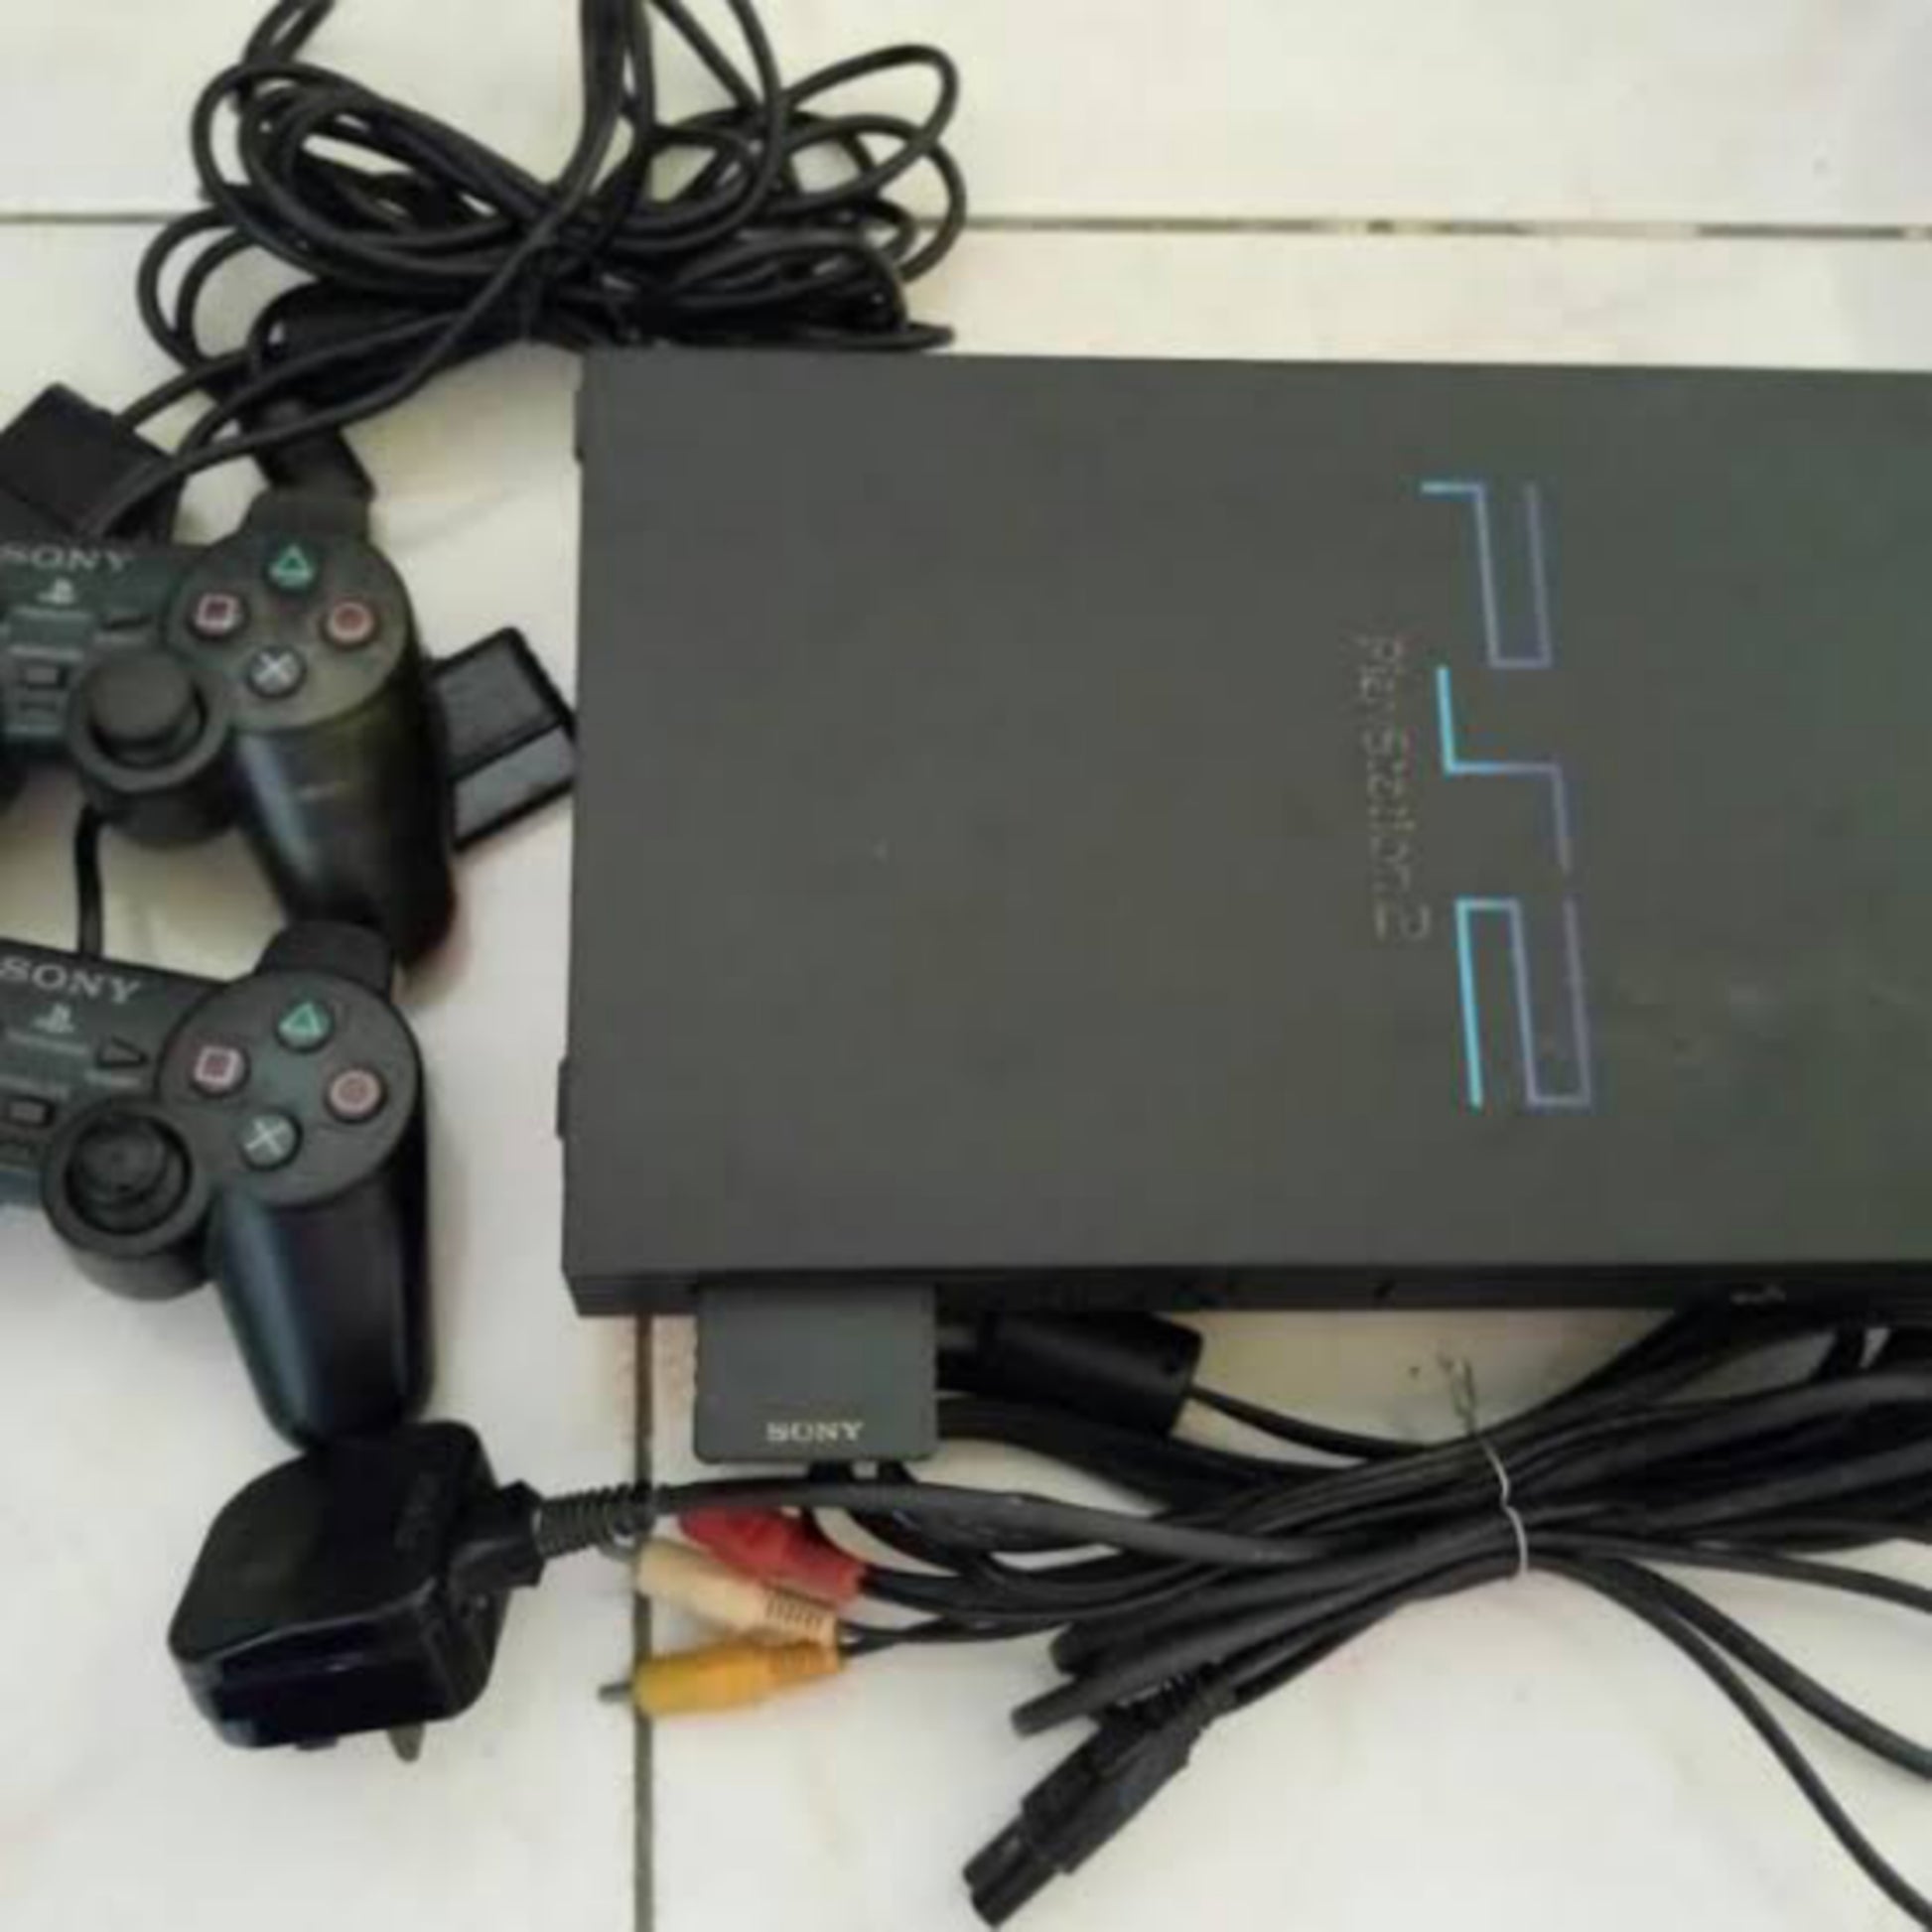 UK Used PS2 (Sony Playstation 2) Game Console Complete Set With Extra Game Controller & 10 Titles